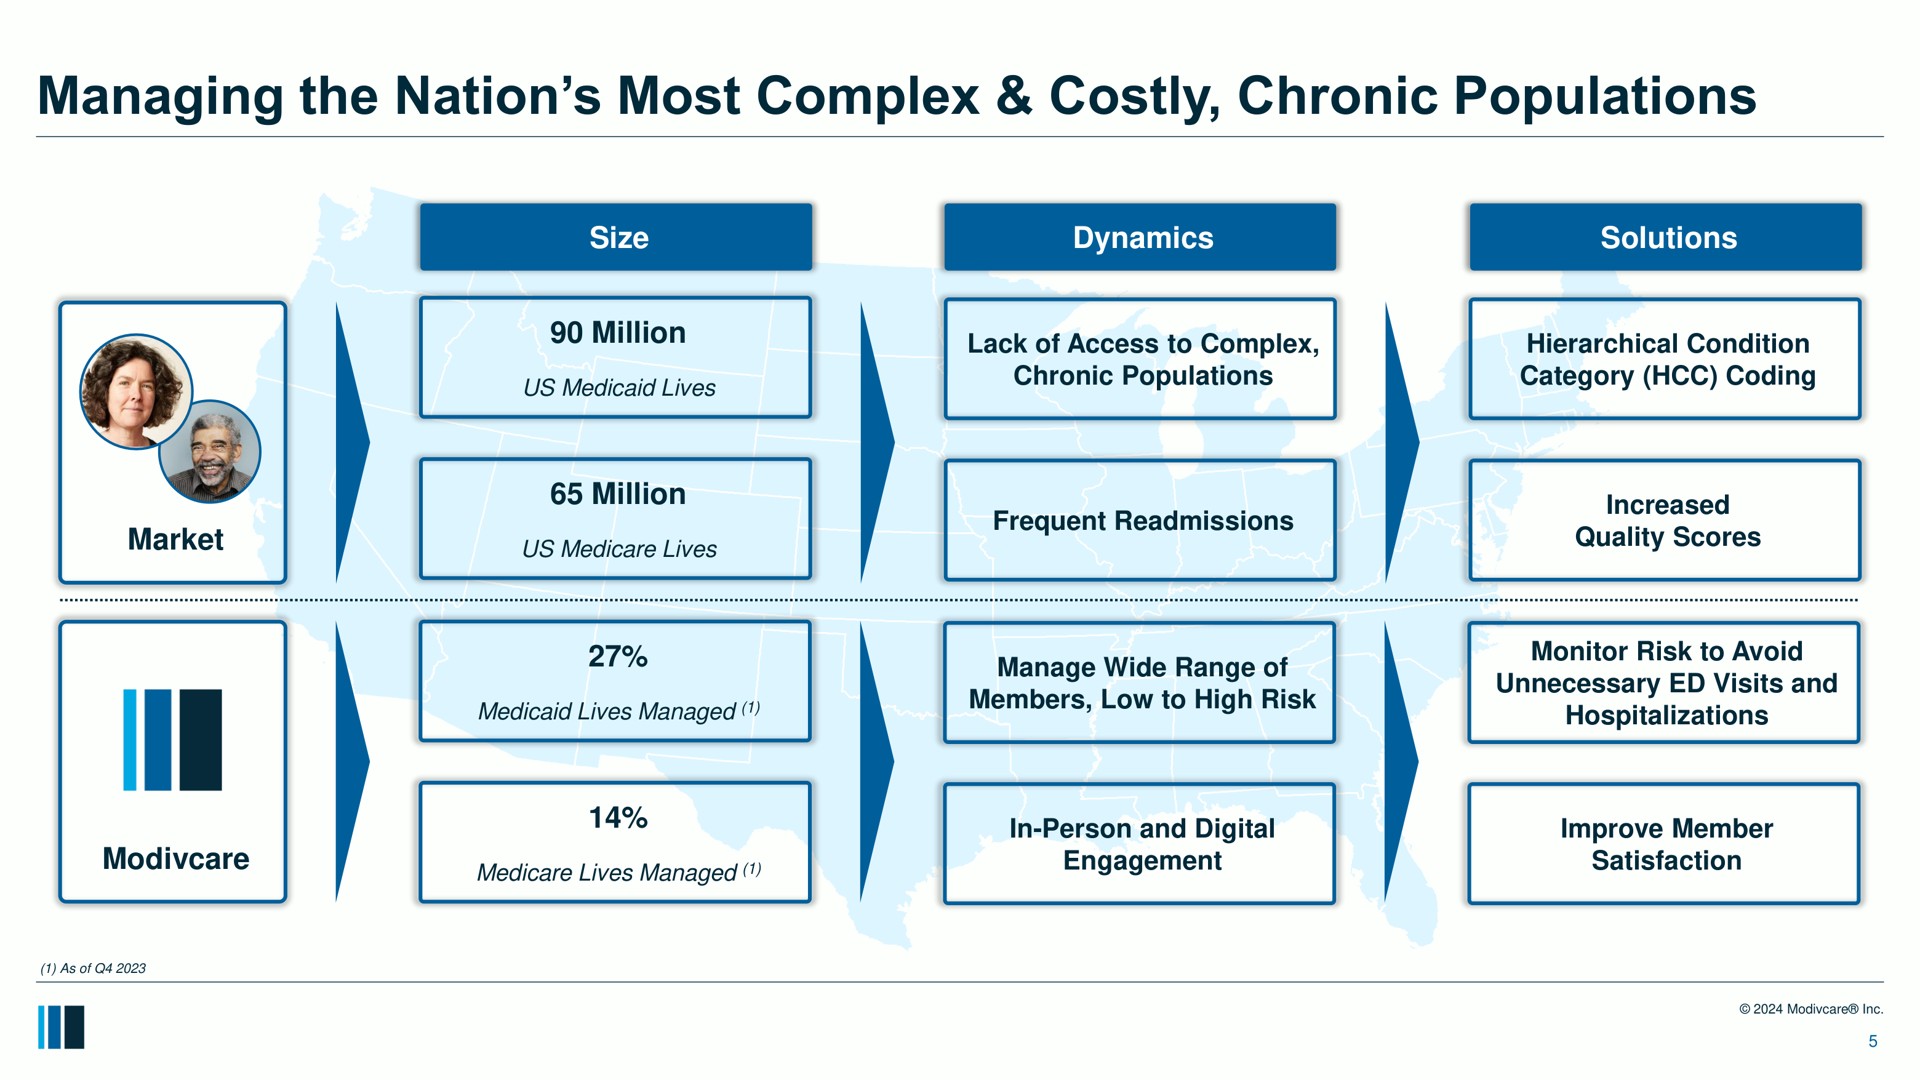 managing the nation most complex costly chronic populations a us lives lack of access to hierarchical condition category coding is members low to high risk lives managed engagement satisfaction | ModivCare